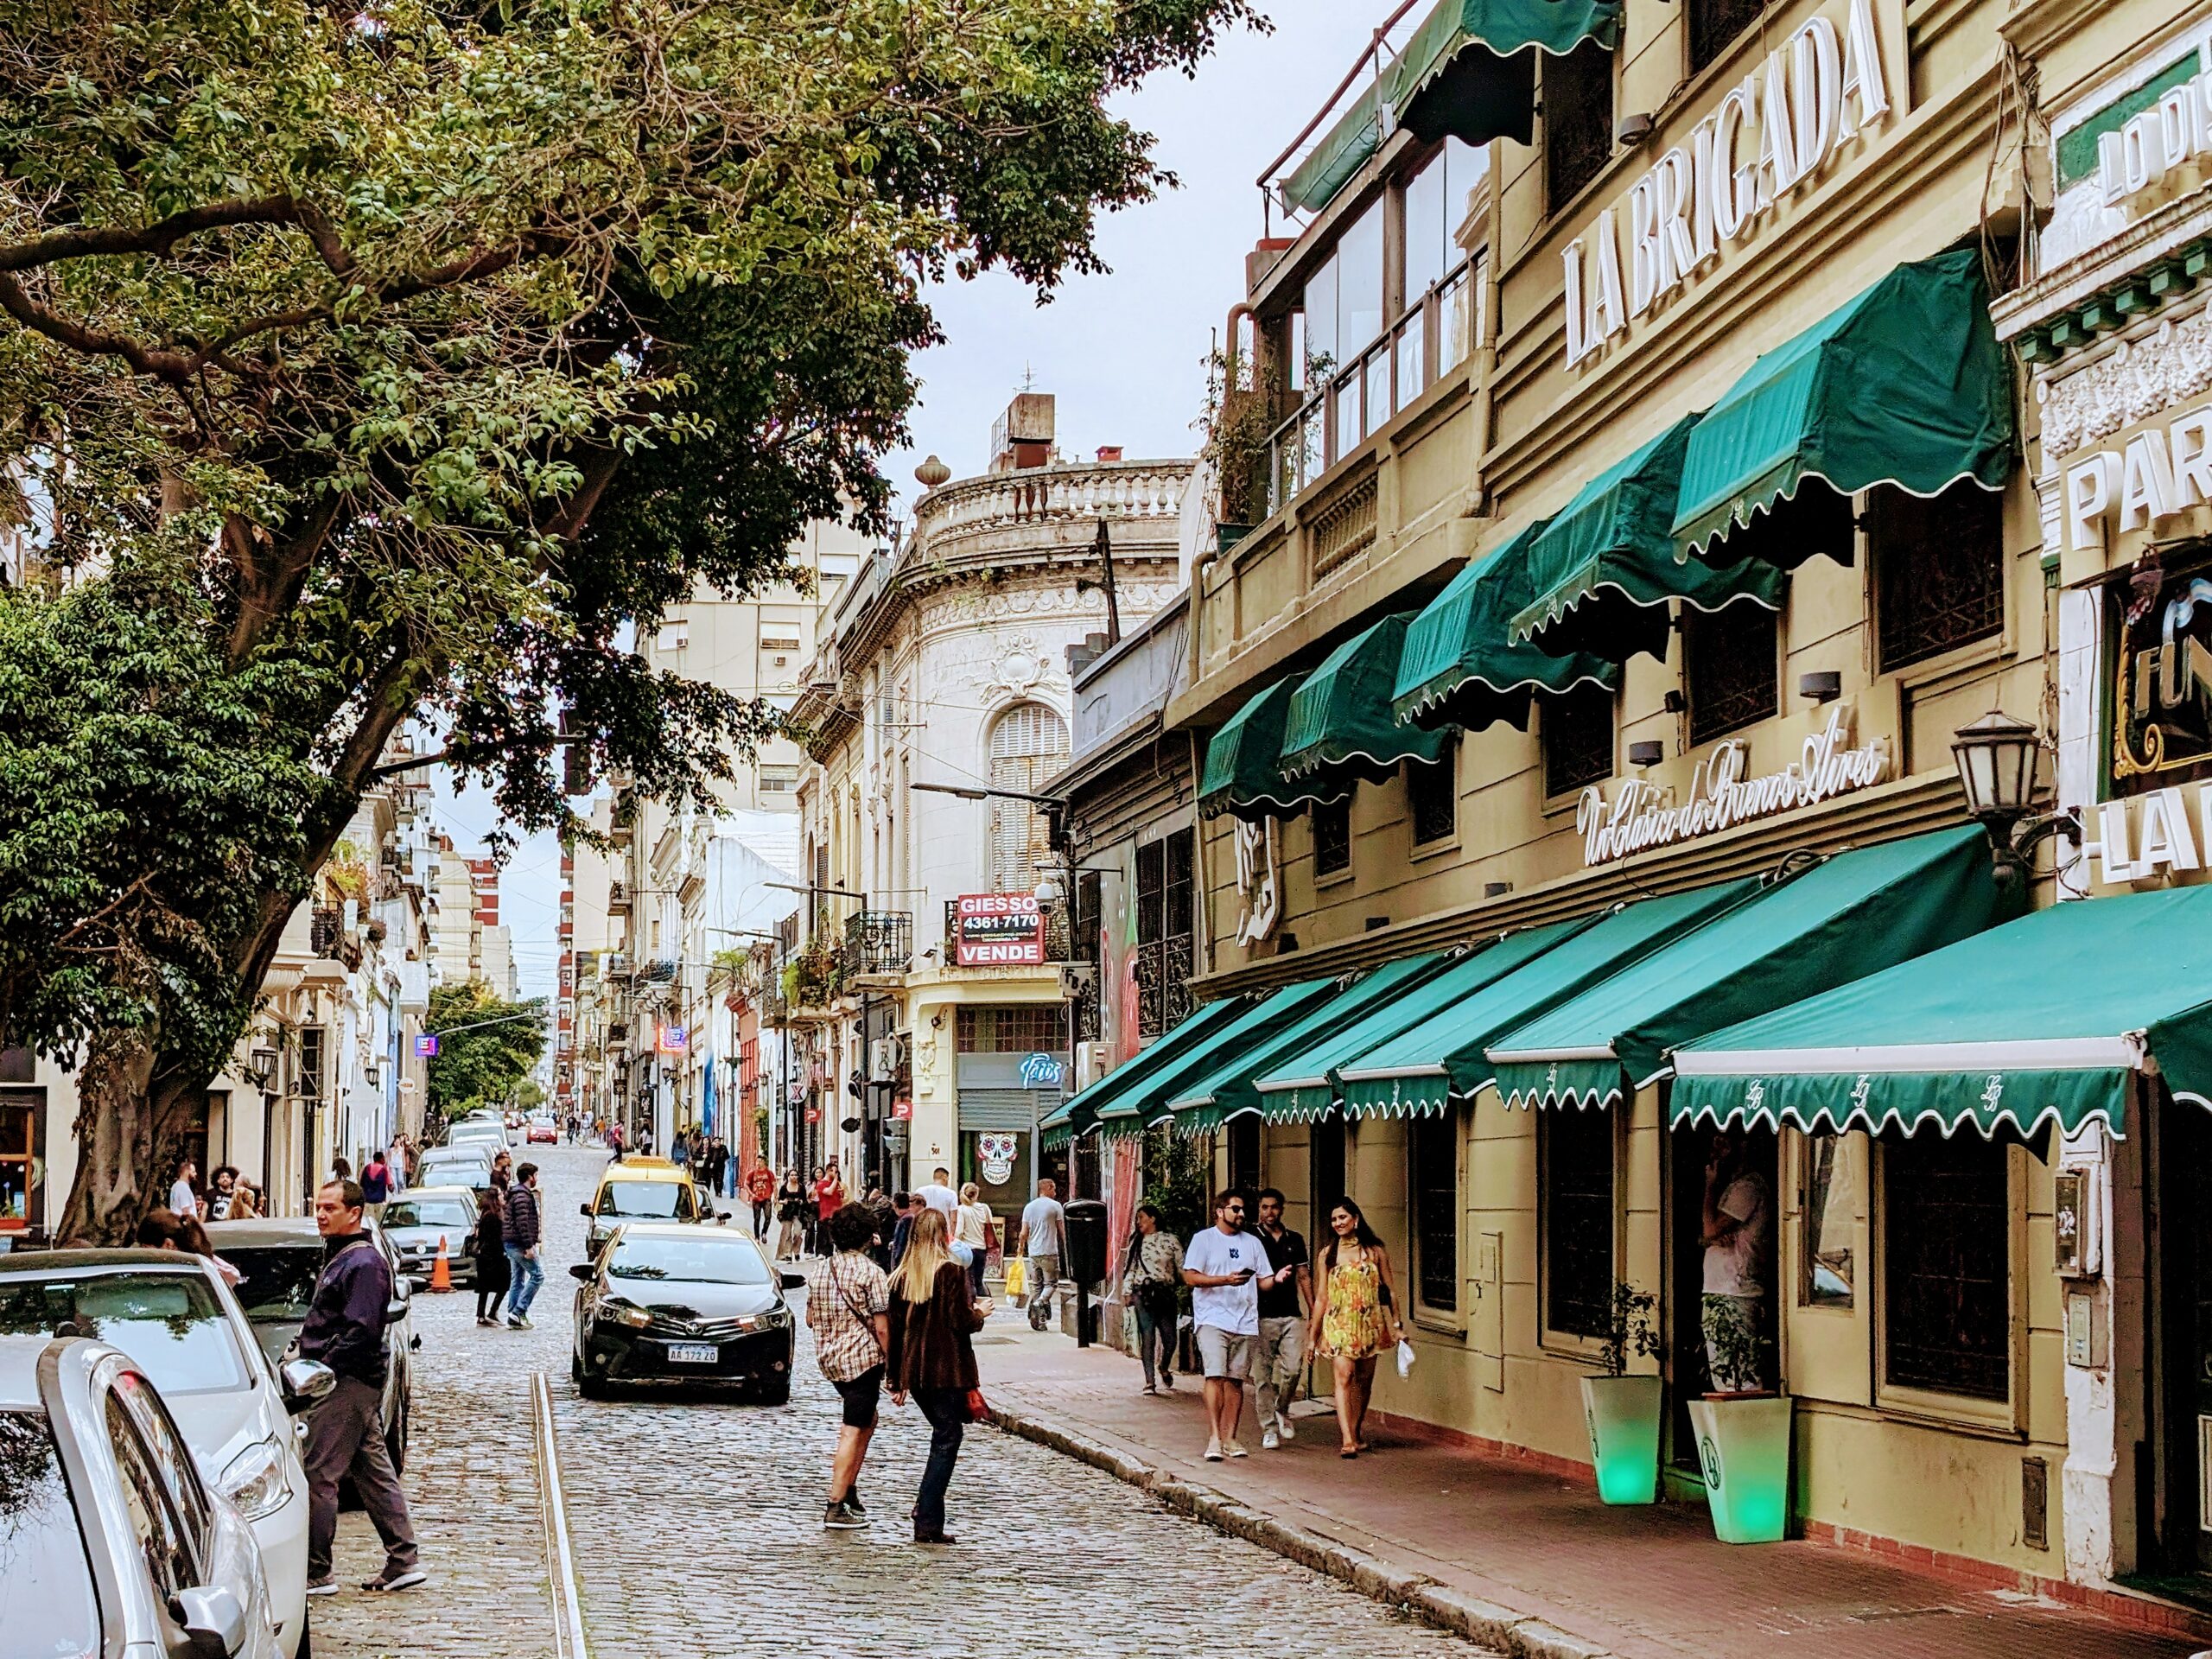 Street in San Telmo, Buenos Aires, Argentina with shops with green awnings.